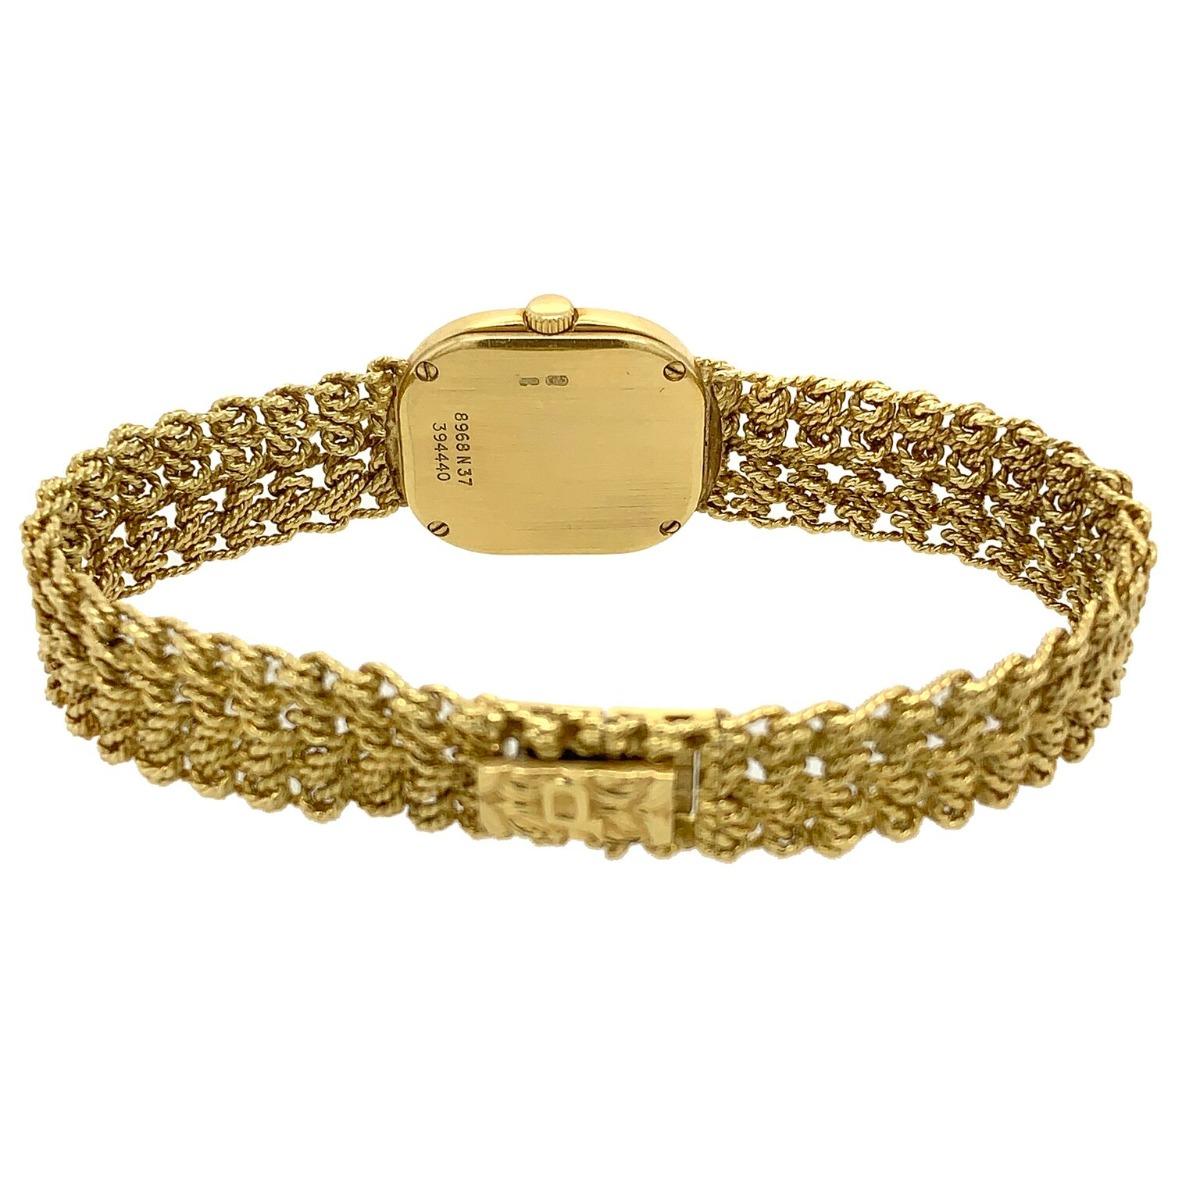 Piaget 18 Karat Yellow Gold Bracelet Watch In Excellent Condition For Sale In New York, NY